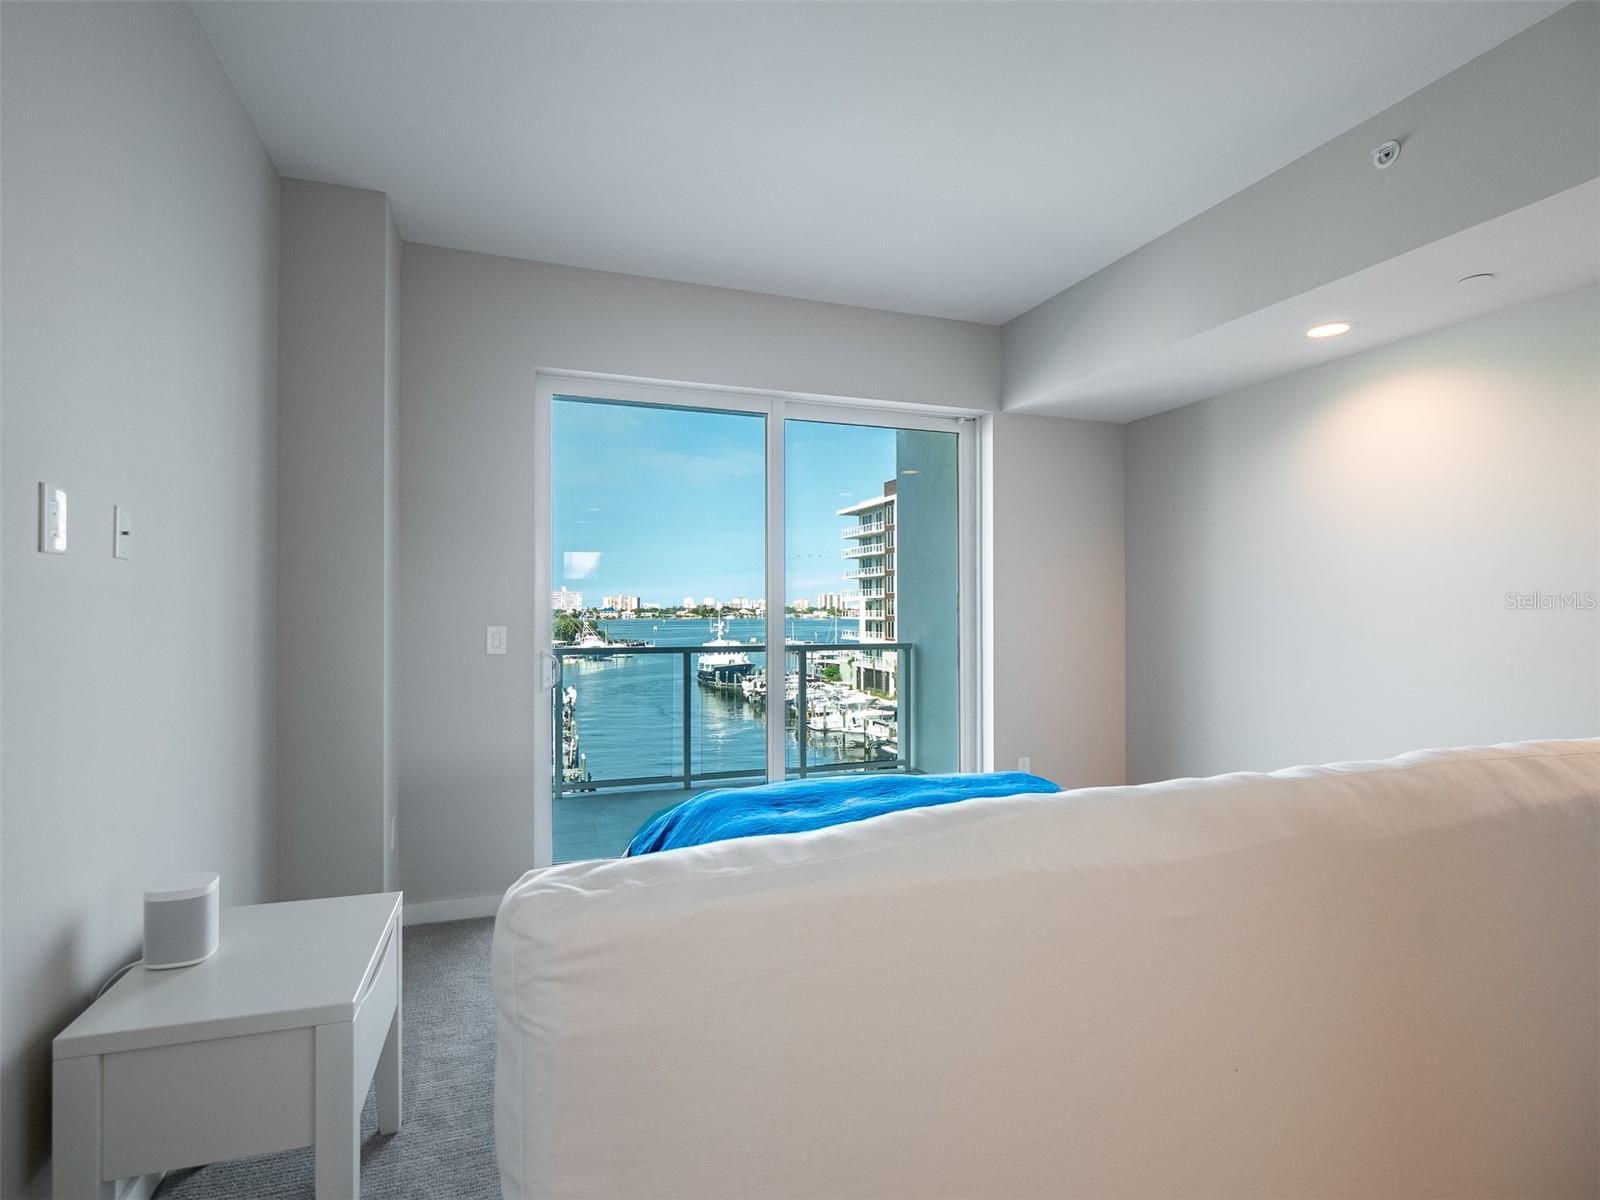 Primary bedroom views to the marina through sliding doors to the private balcony